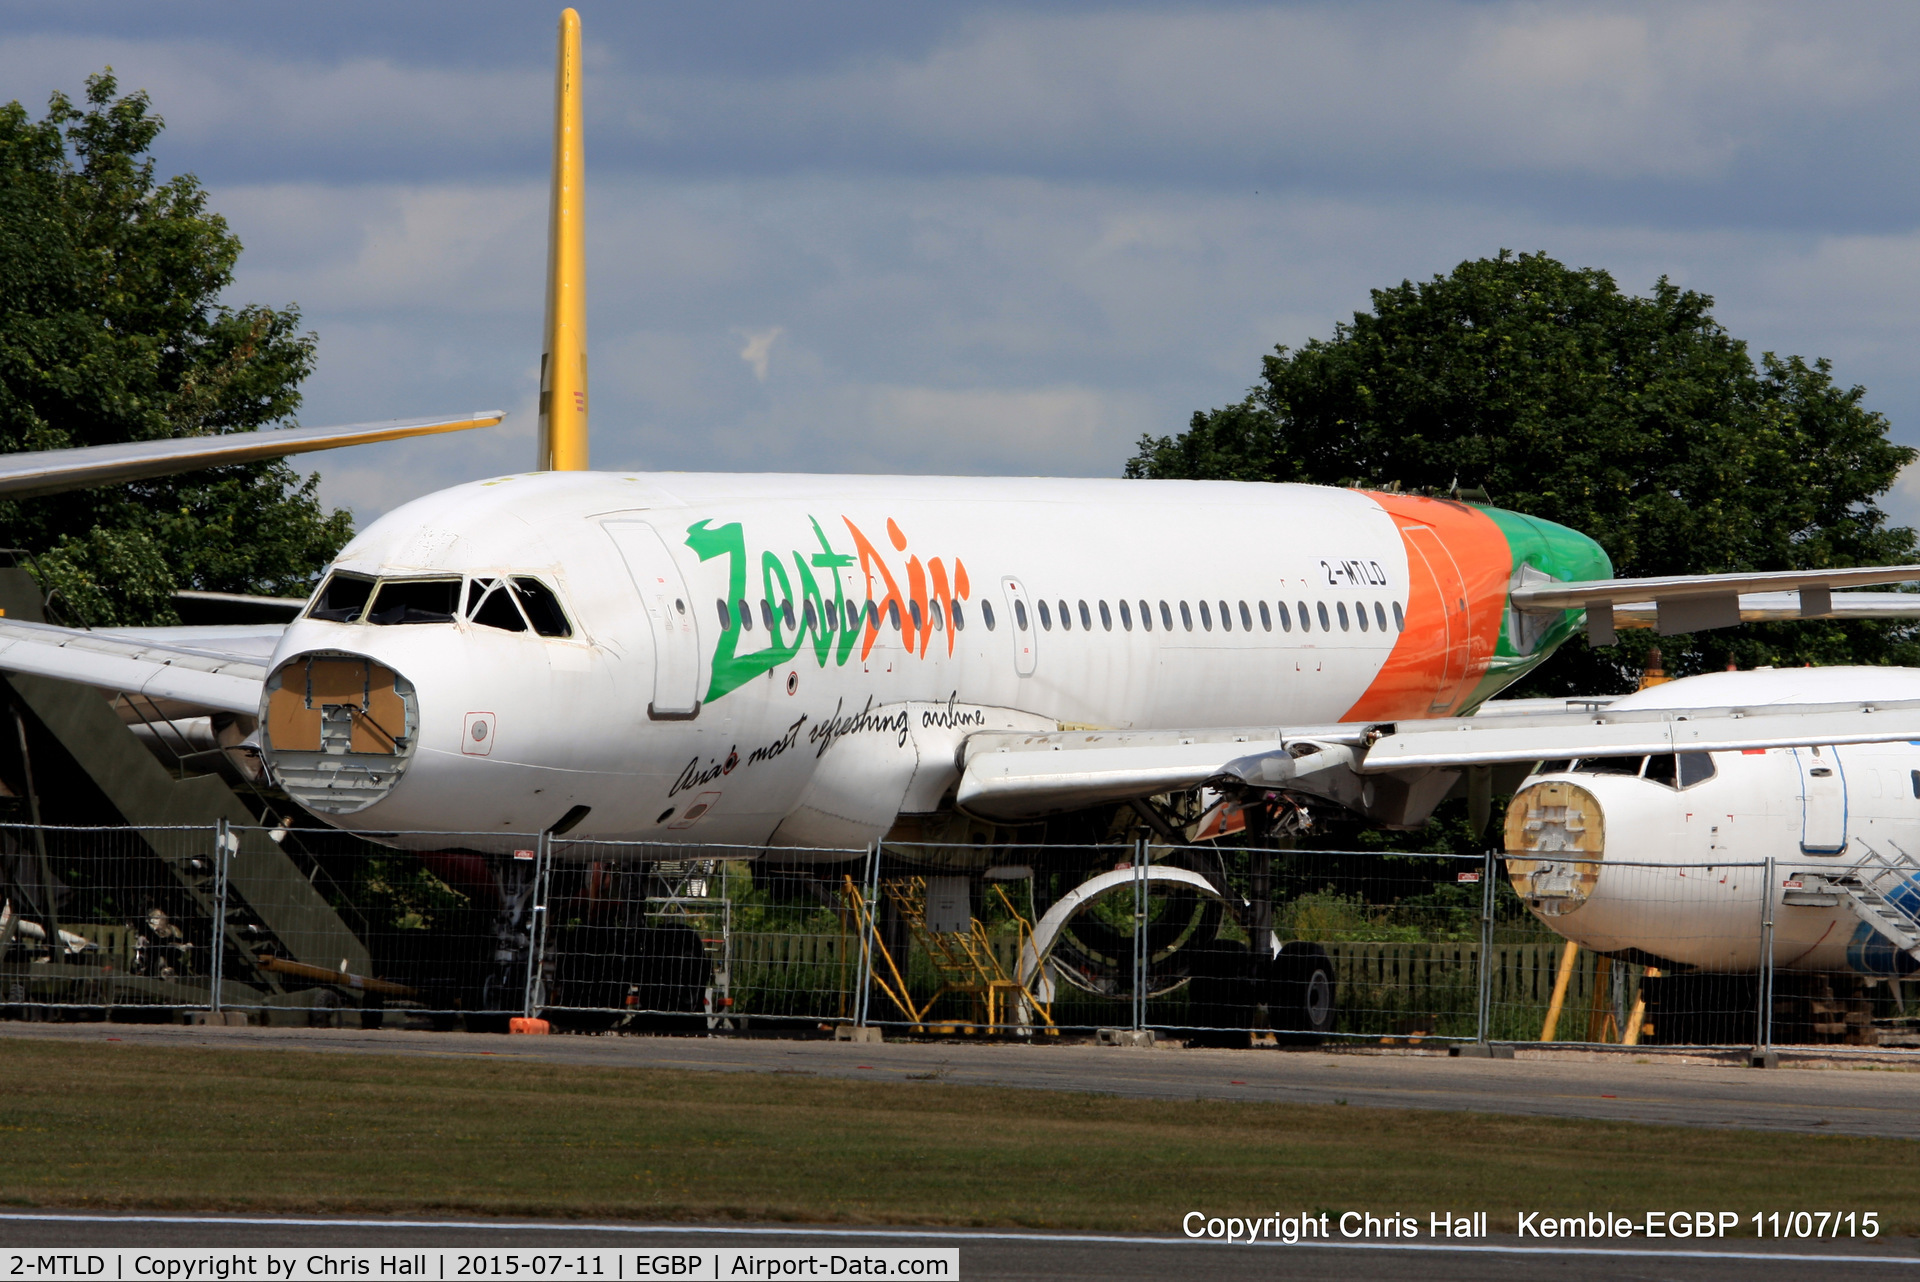 2-MTLD, 1999 Airbus A319-132 C/N 1074, ex AirAsia Zest, in the scrapping area at Kemble